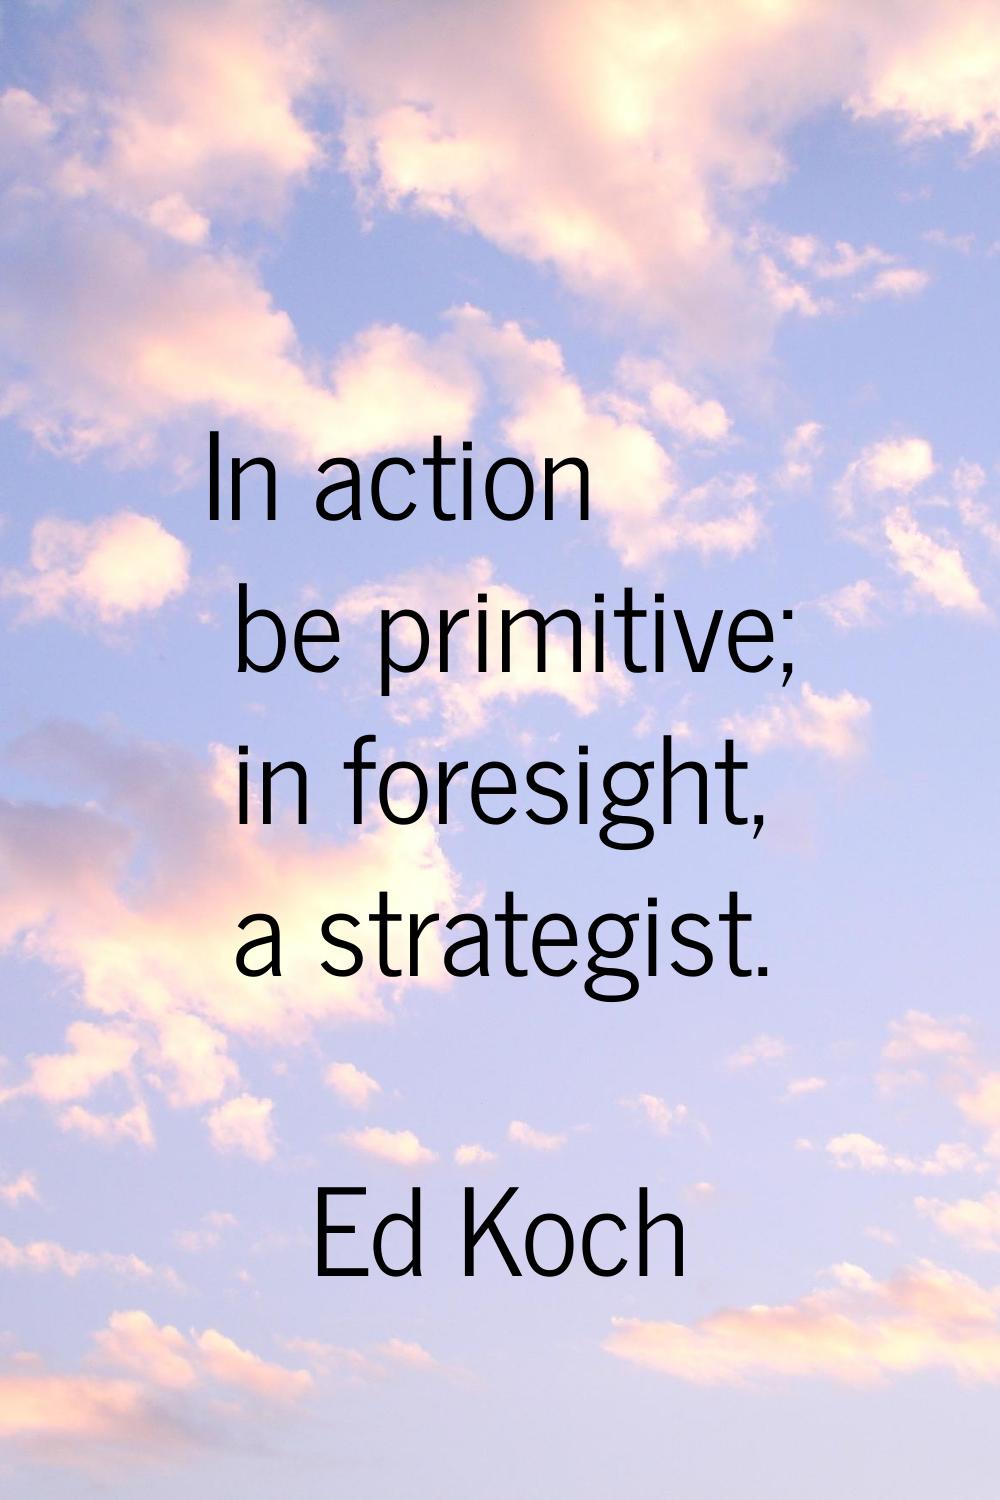 In action be primitive; in foresight, a strategist.